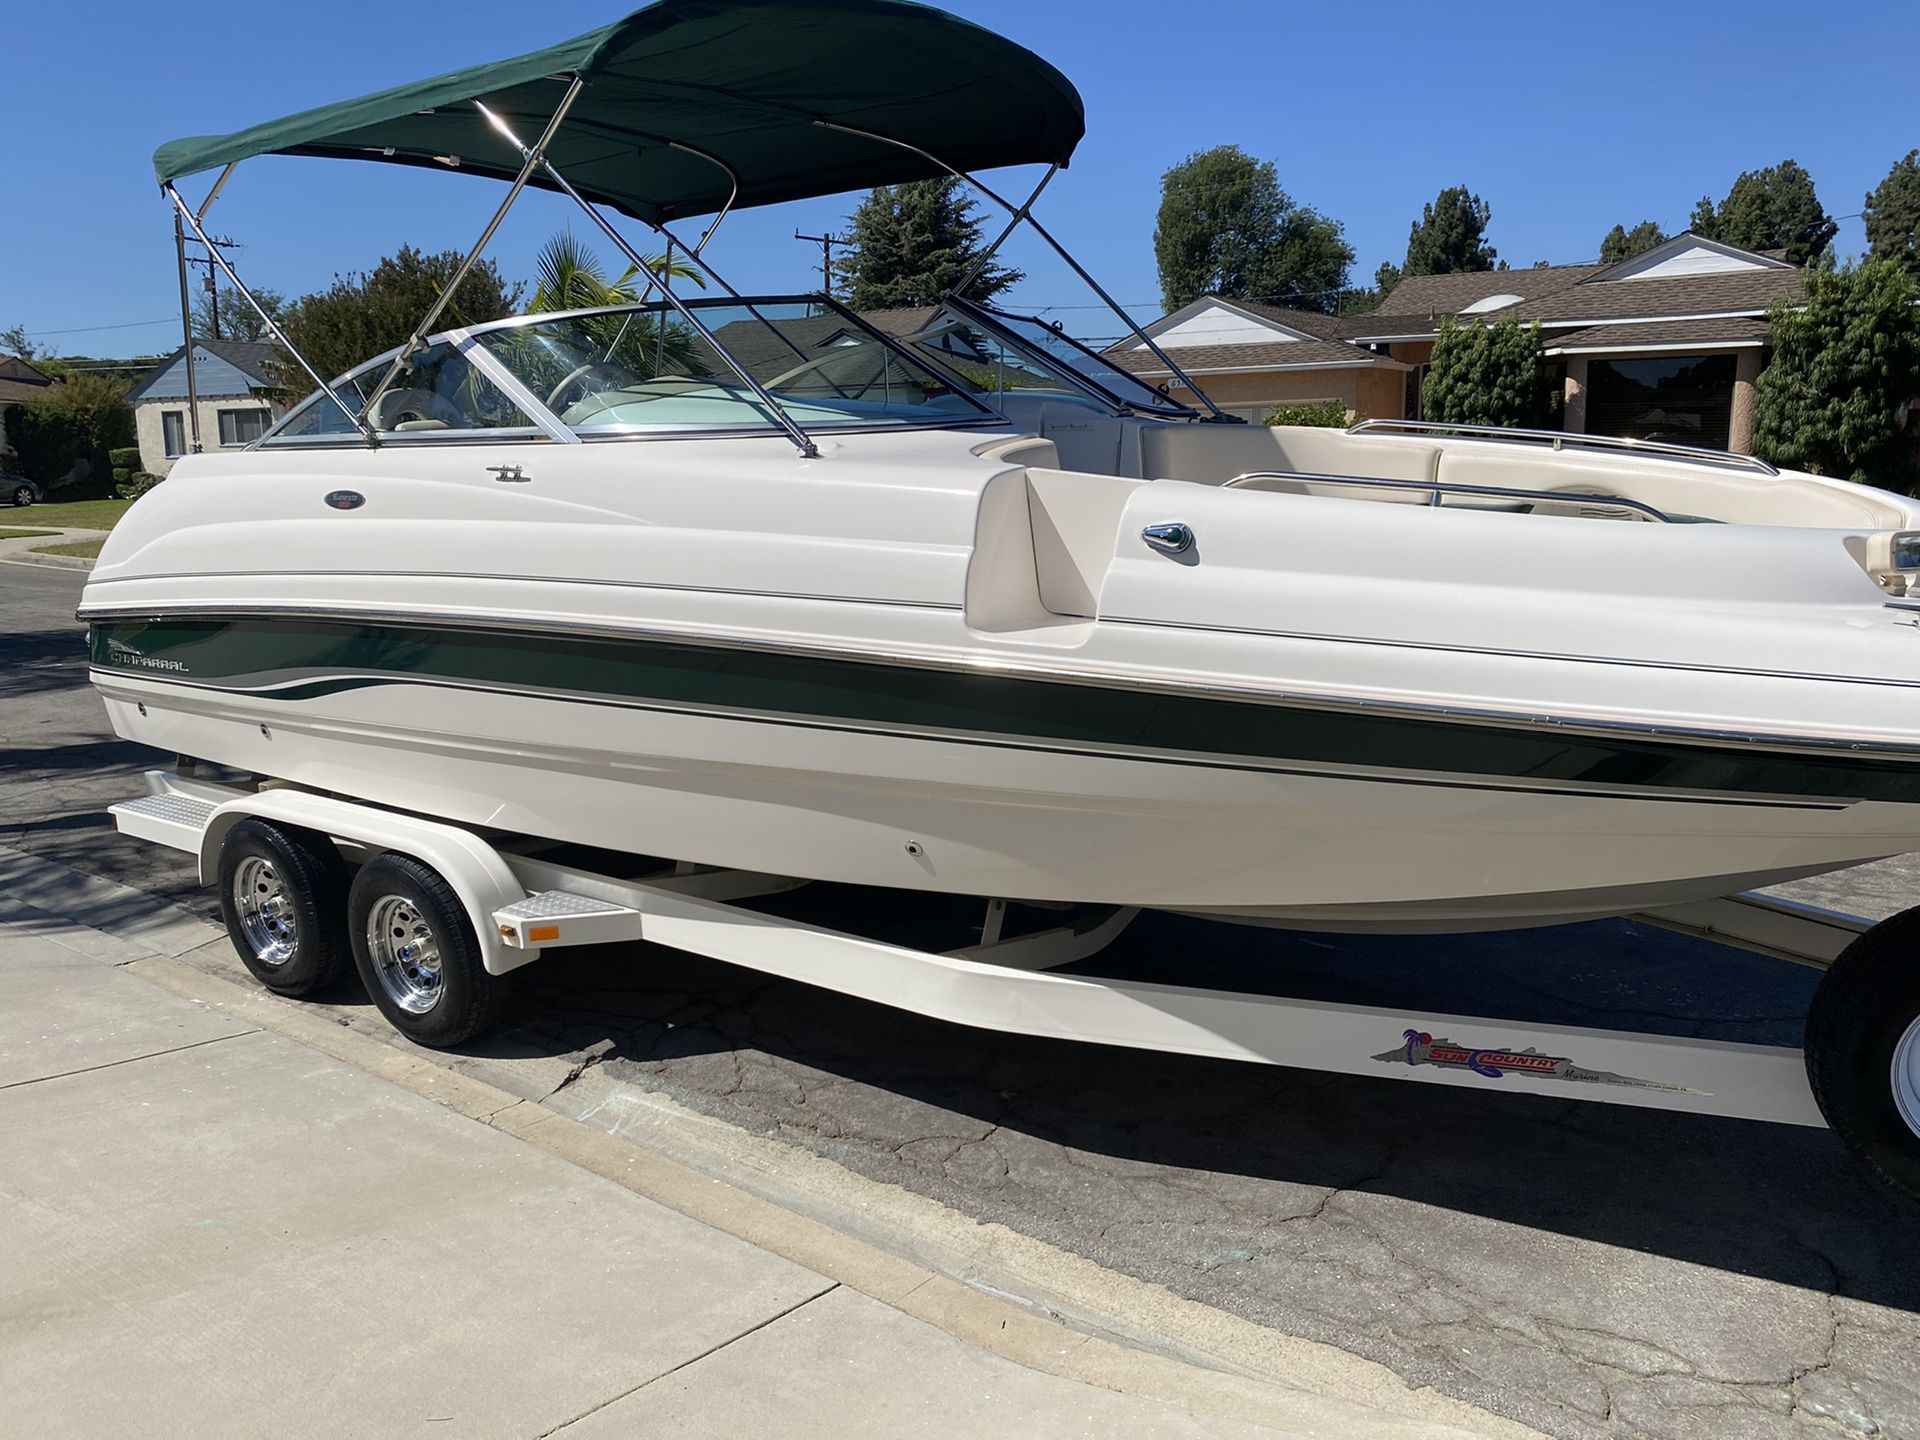 Chaparral Sunesta 233 23’ Deck Boat with low hours